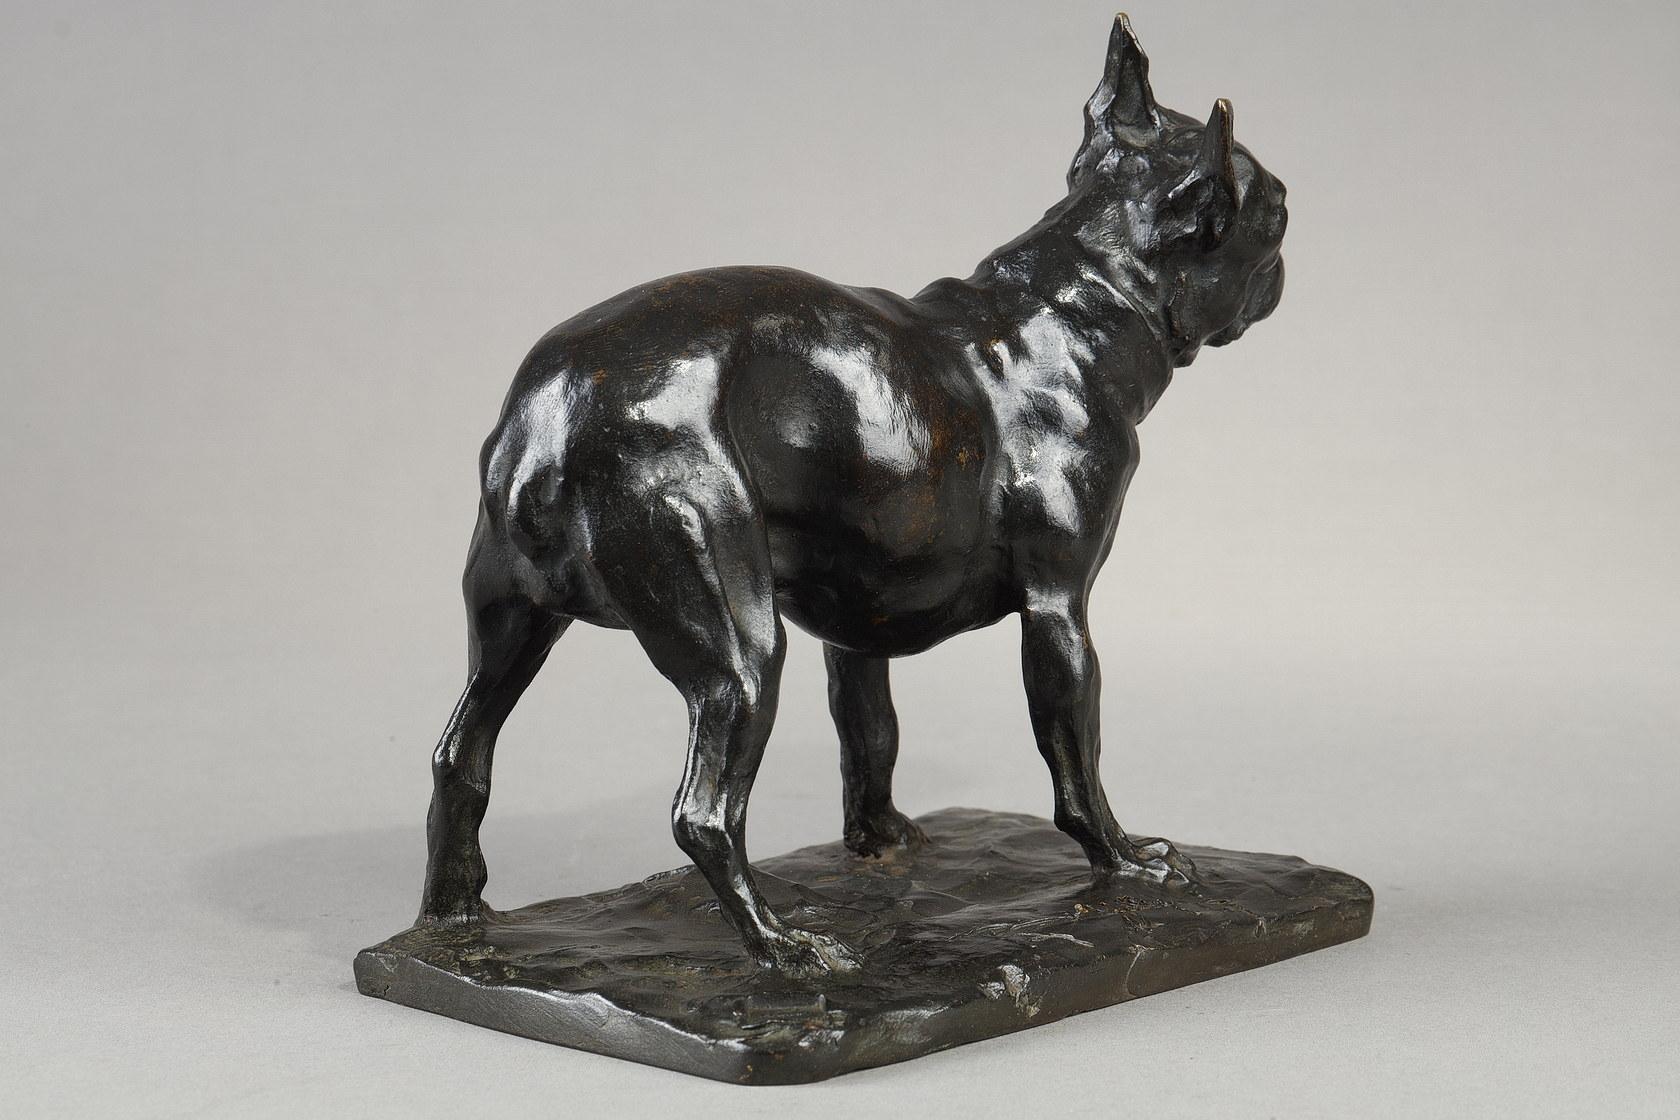 Rembrandt BUGATTI (1884-1916)
French bulldog
also known as The Dog of Teresa Lorioli (mother of the artist)
Small size

Sculpture in bronze with a nuanced black patina.
Signed on the base 